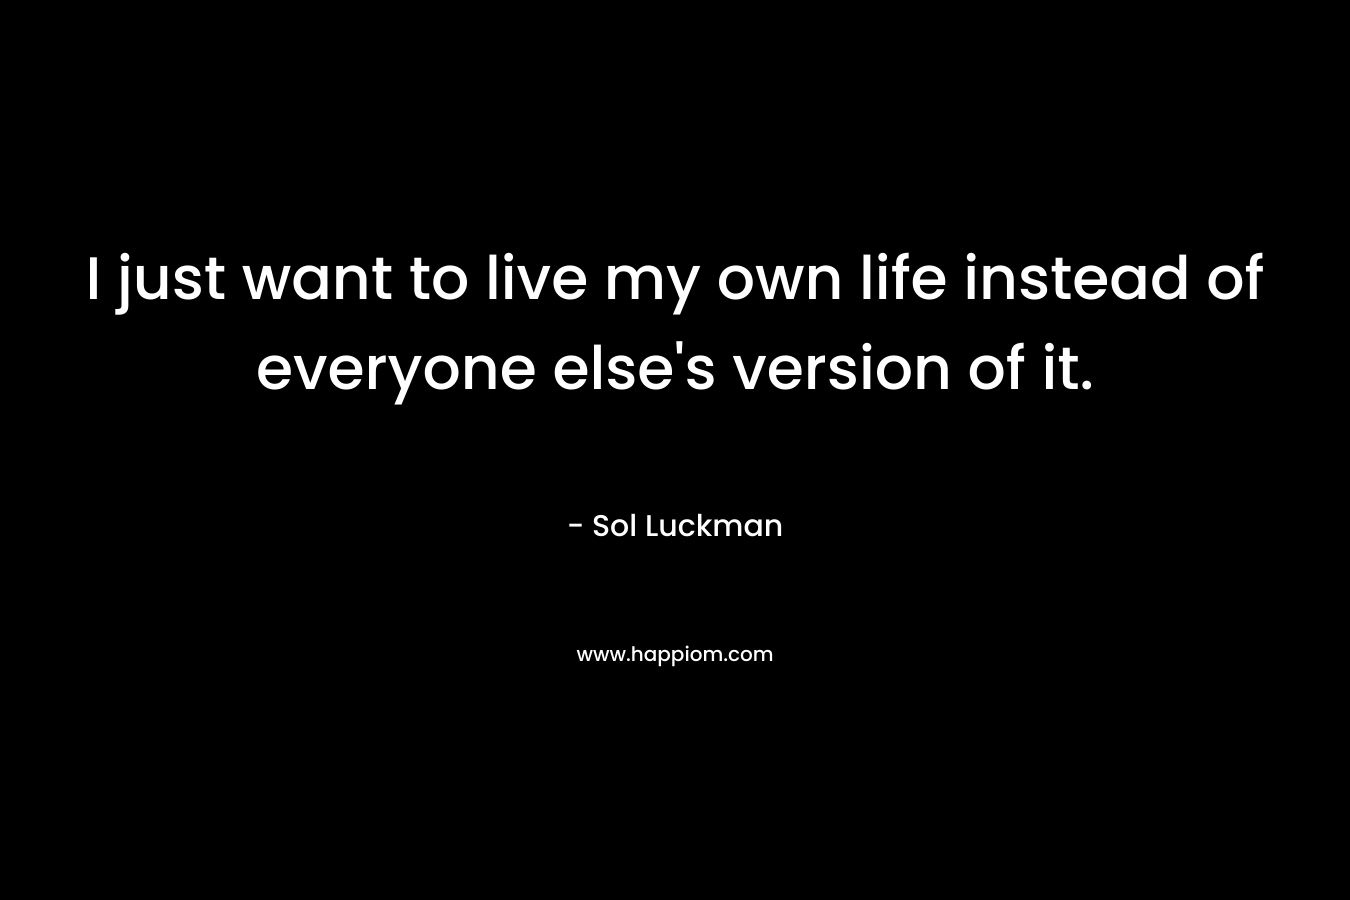 I just want to live my own life instead of everyone else's version of it.